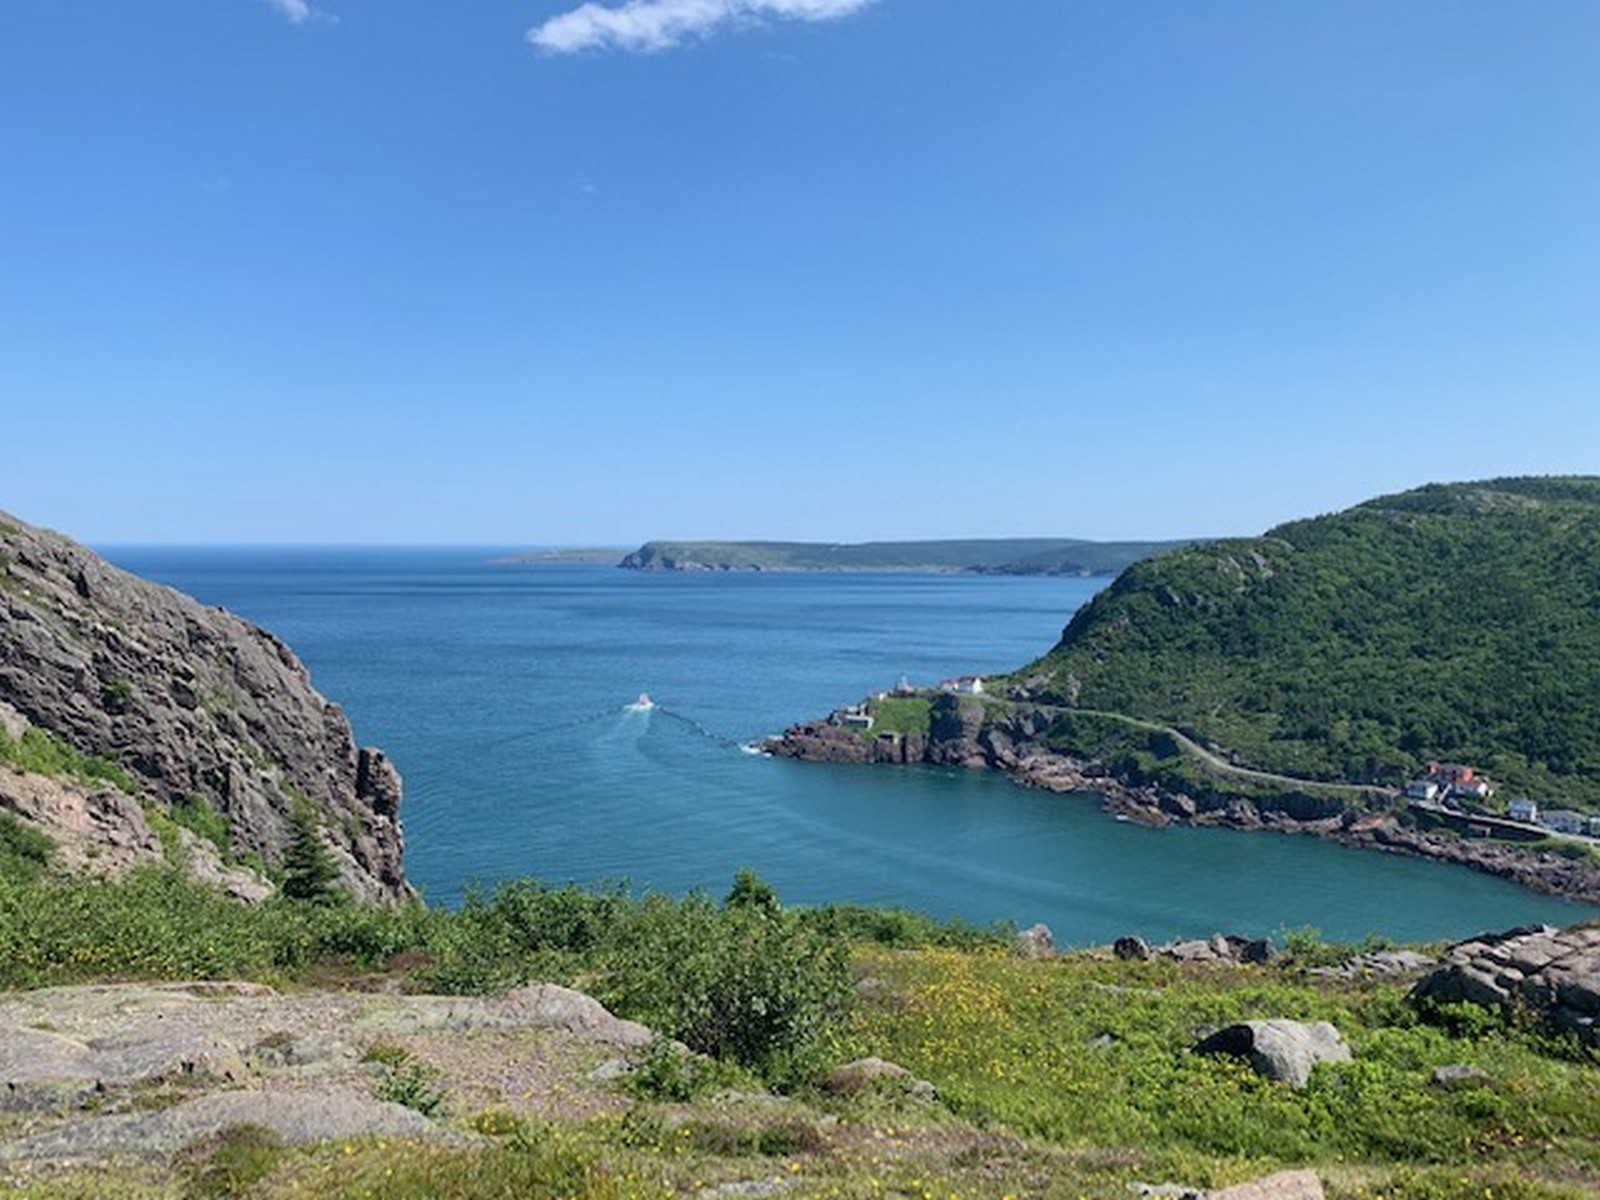 Two Days In St. John's Newfoundland